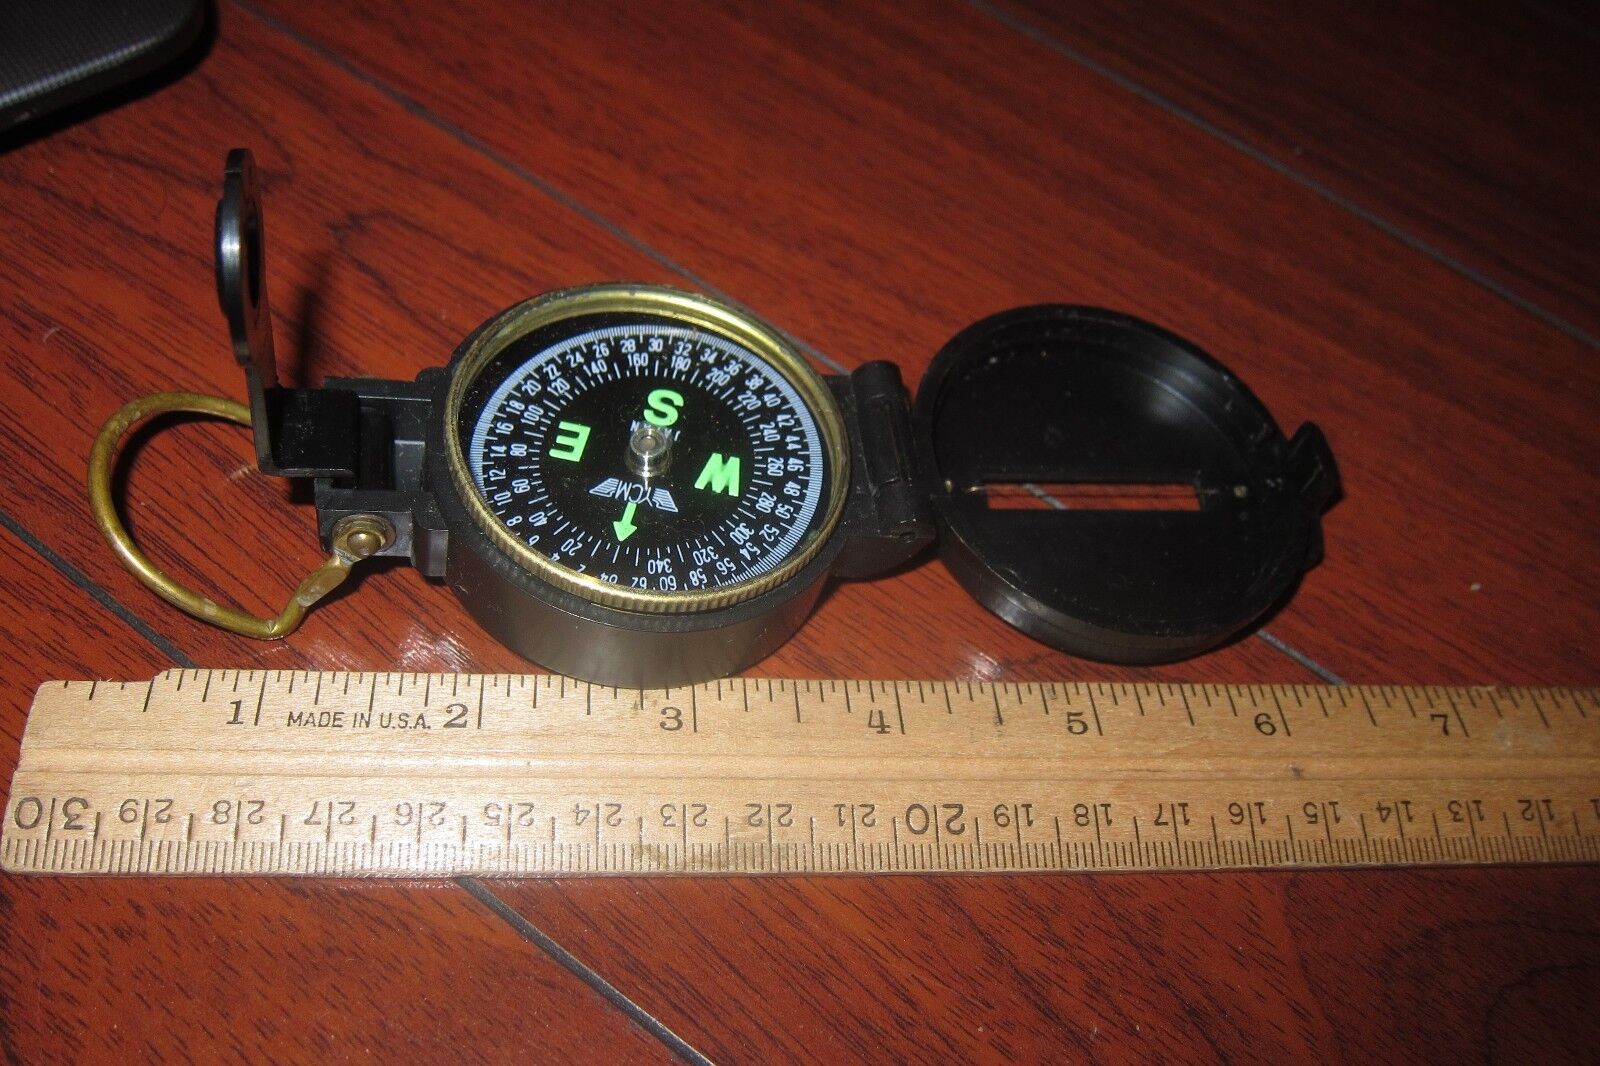 VINTAGE ENGINEER\'S LENSATIC COMPASS MADE IN TAIWAN EXCELLENT LOOK